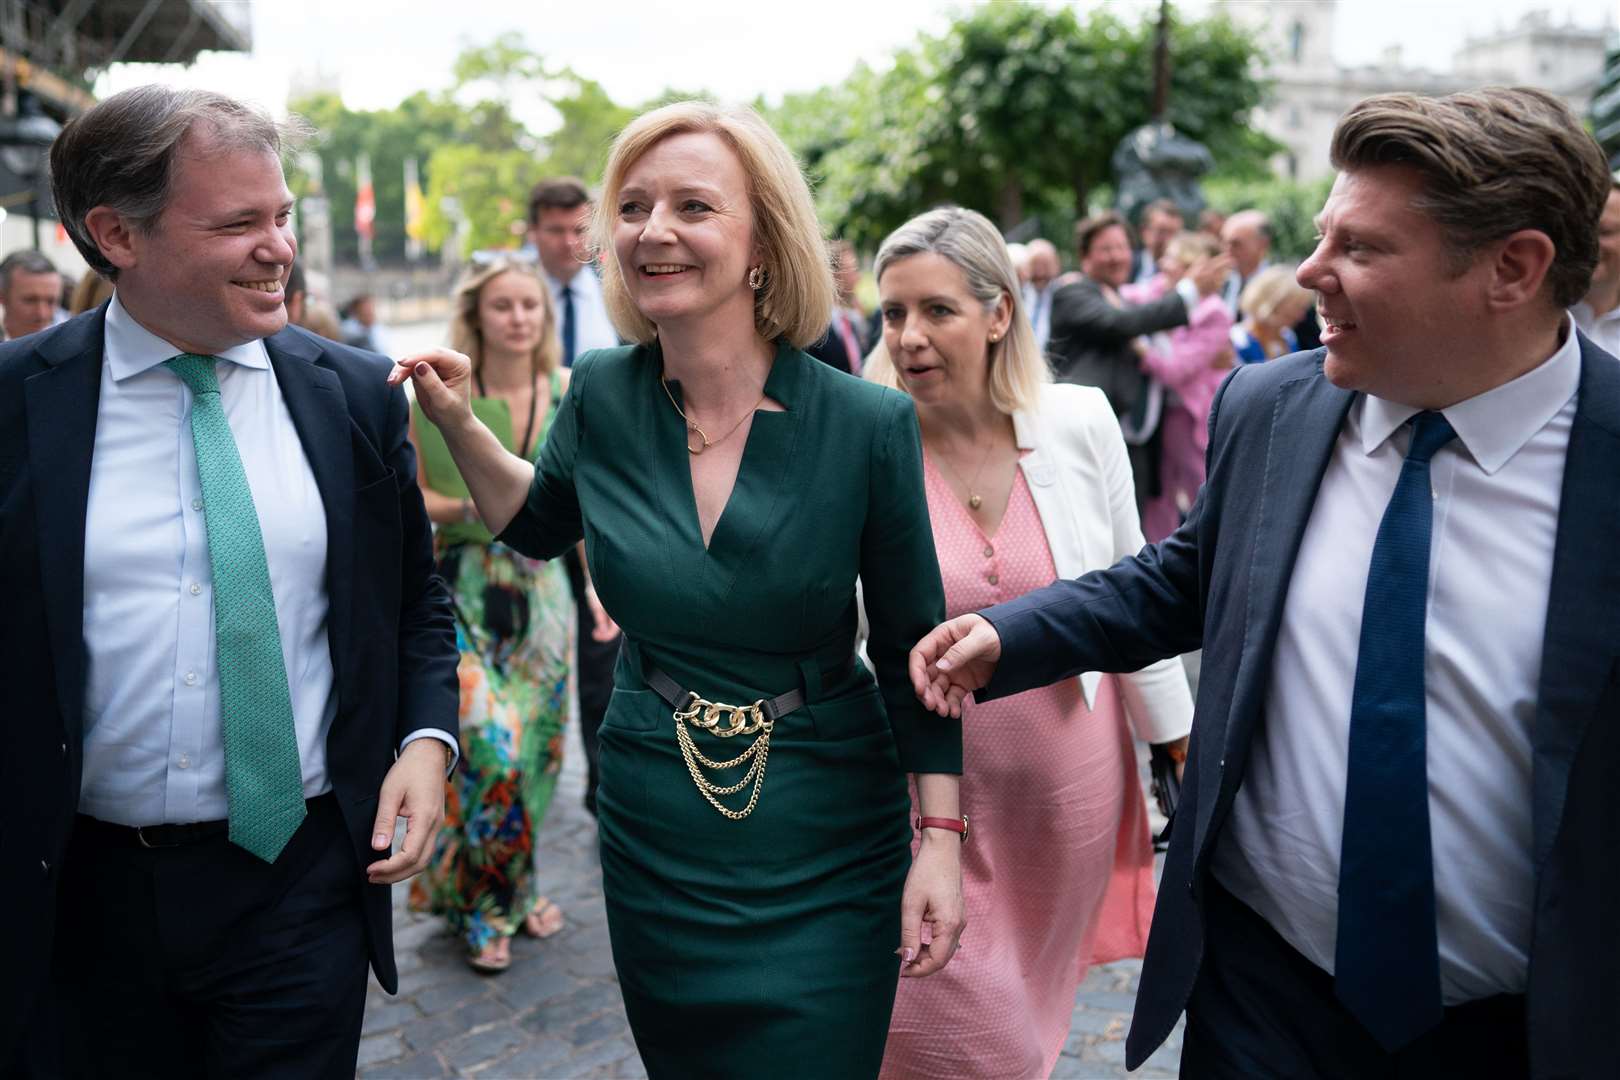 Liz Truss celebrates with her supporters after making it into the final stage of the race to Number 10 (Stefan Rousseau/PA)